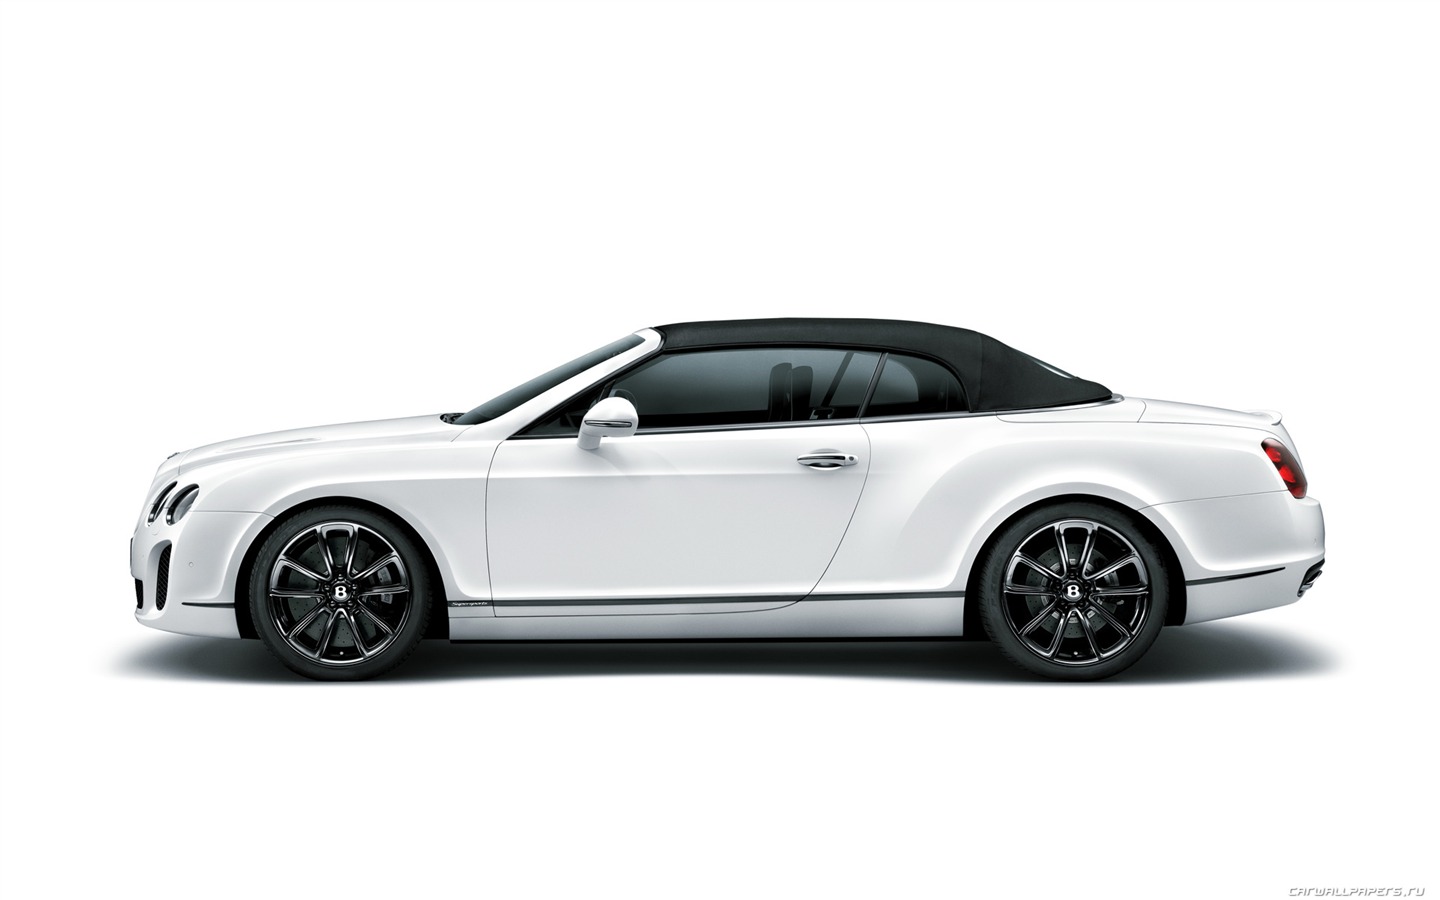 Bentley Continental Supersports Convertible - 2010 宾利51 - 1440x900